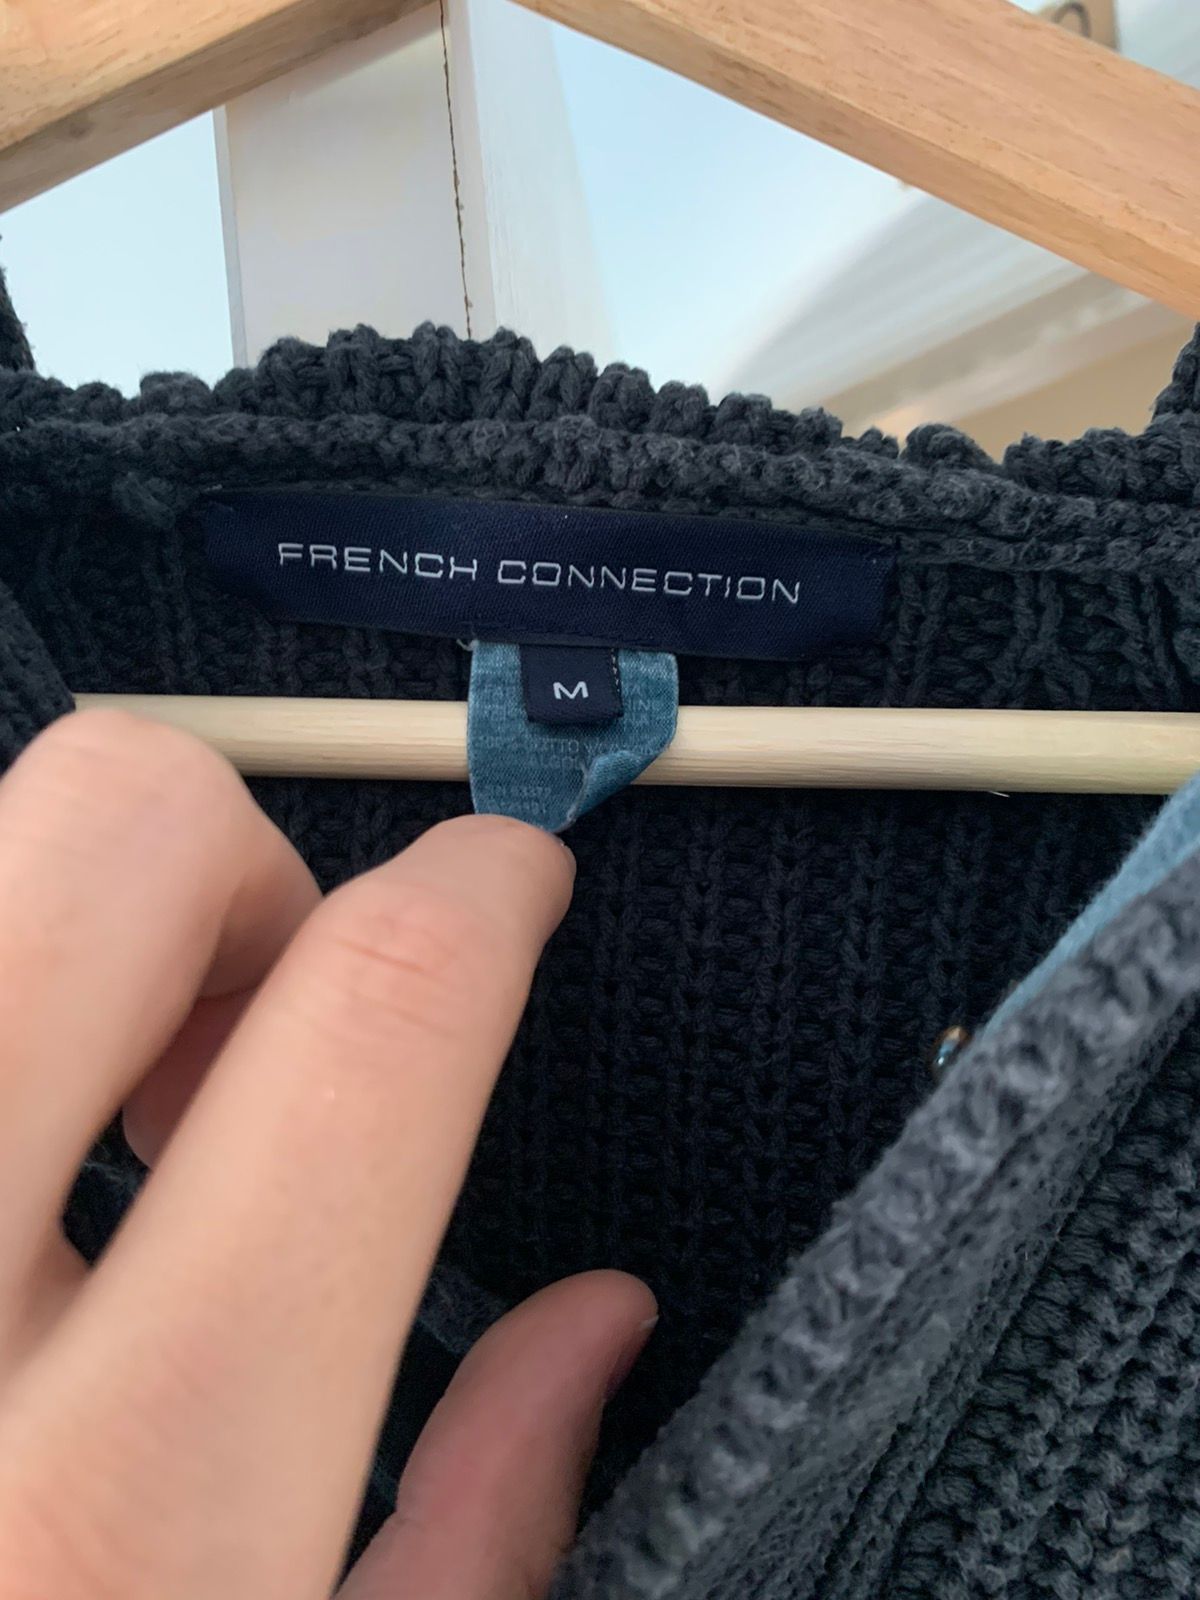 French Connection Sweatshirt/ Hoodie Size US M / EU 48-50 / 2 - 3 Preview